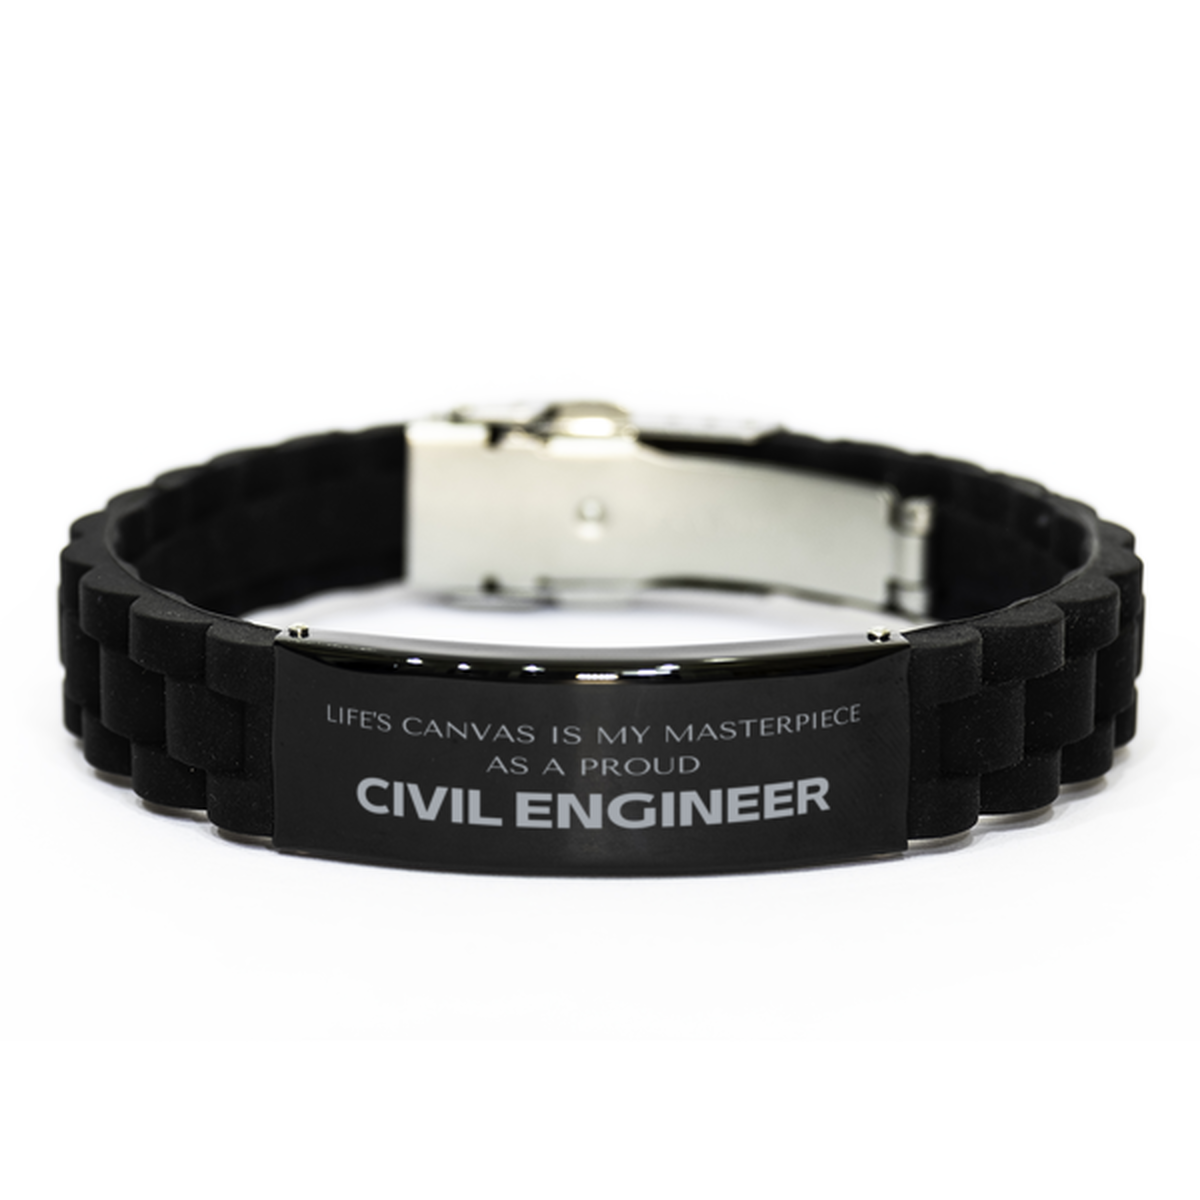 Proud Civil Engineer Gifts, Life's canvas is my masterpiece, Epic Birthday Christmas Unique Black Glidelock Clasp Bracelet For Civil Engineer, Coworkers, Men, Women, Friends